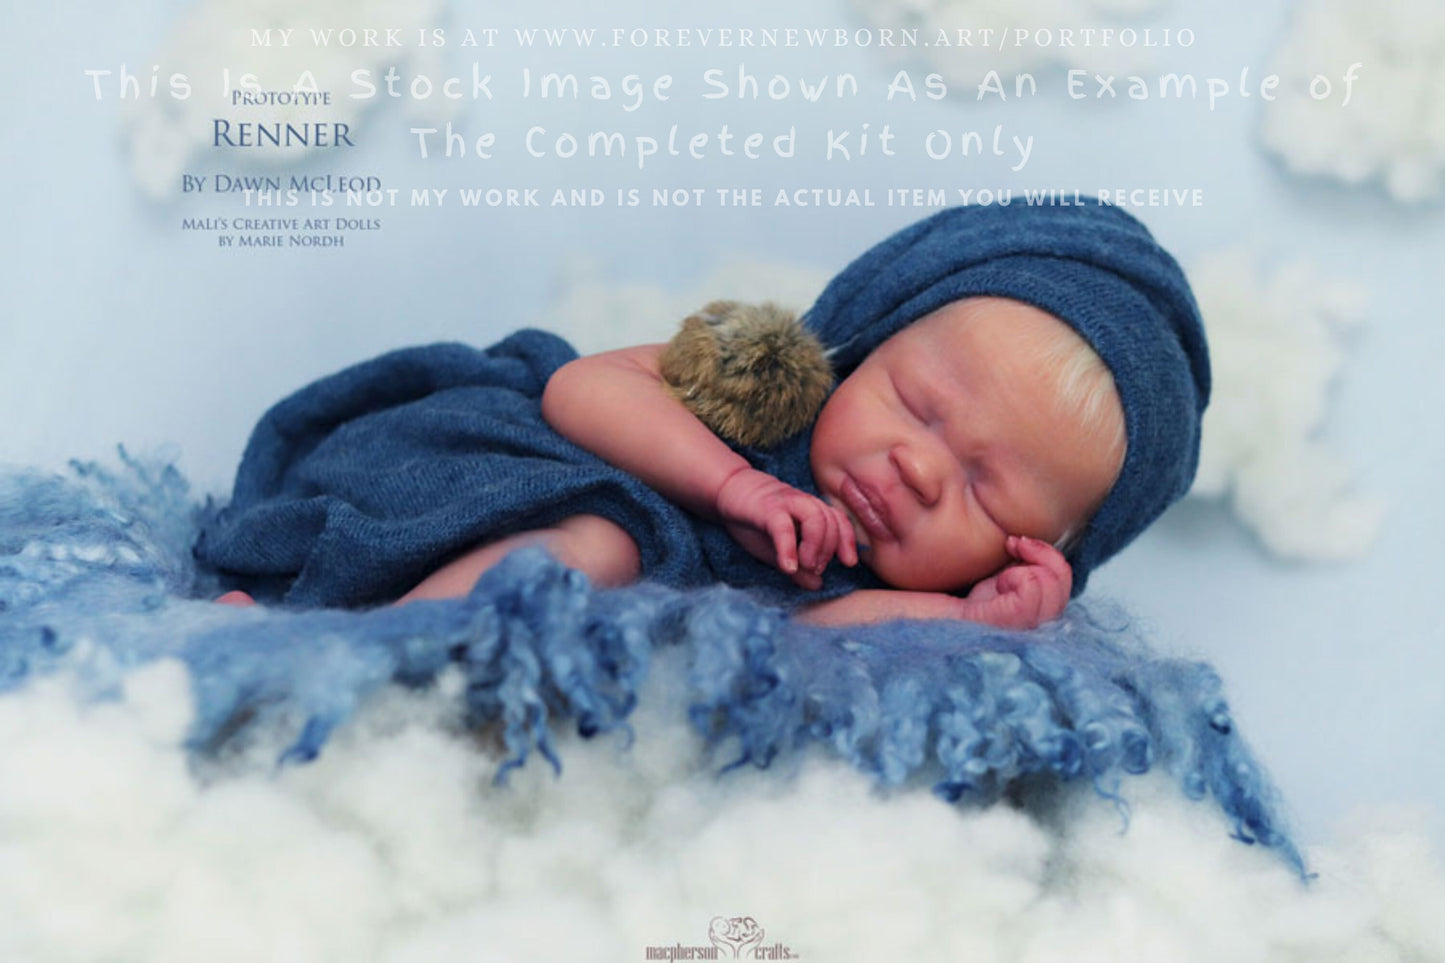 Ultra-Realistic ReBoRn BaBy ~ Renner by Dawn McLeod **Examples Of My Work Included (21 Inches w/ bent legs + Full Limbs)